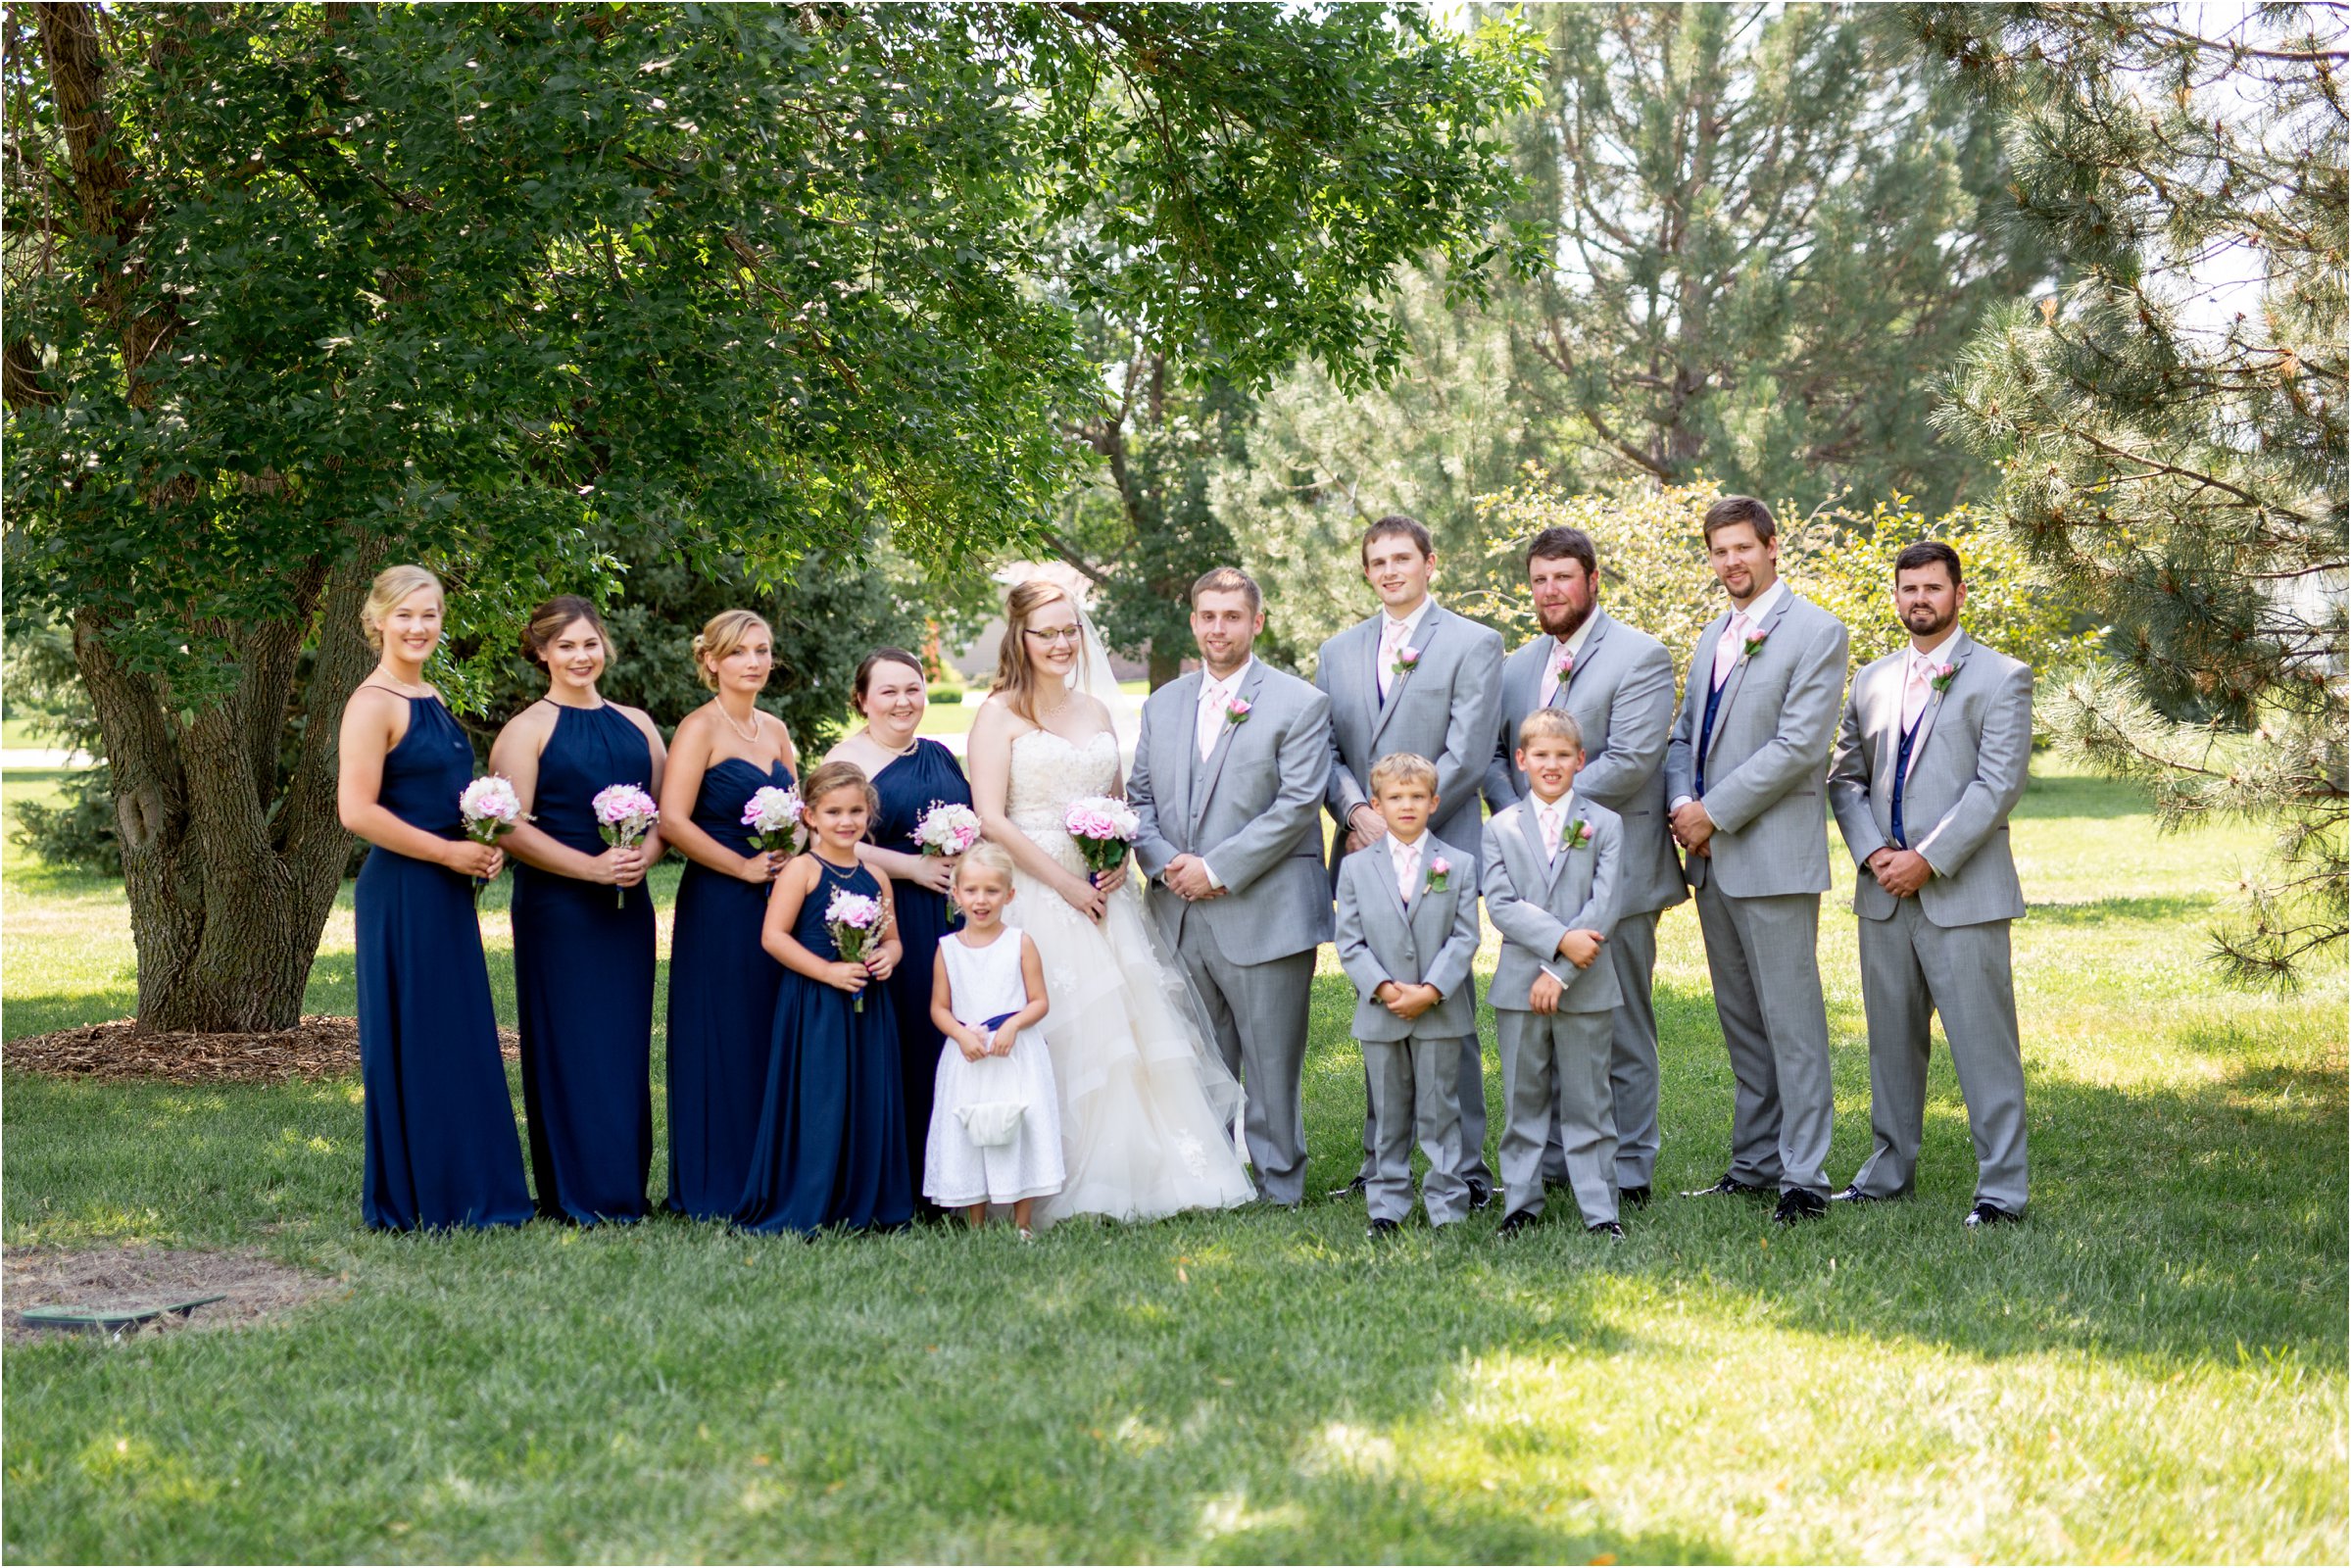 bride and groom pose with her bridesmaids in navy blue dresses with pink flowers and groomsen in gray before their wedding at holdrege trinity church